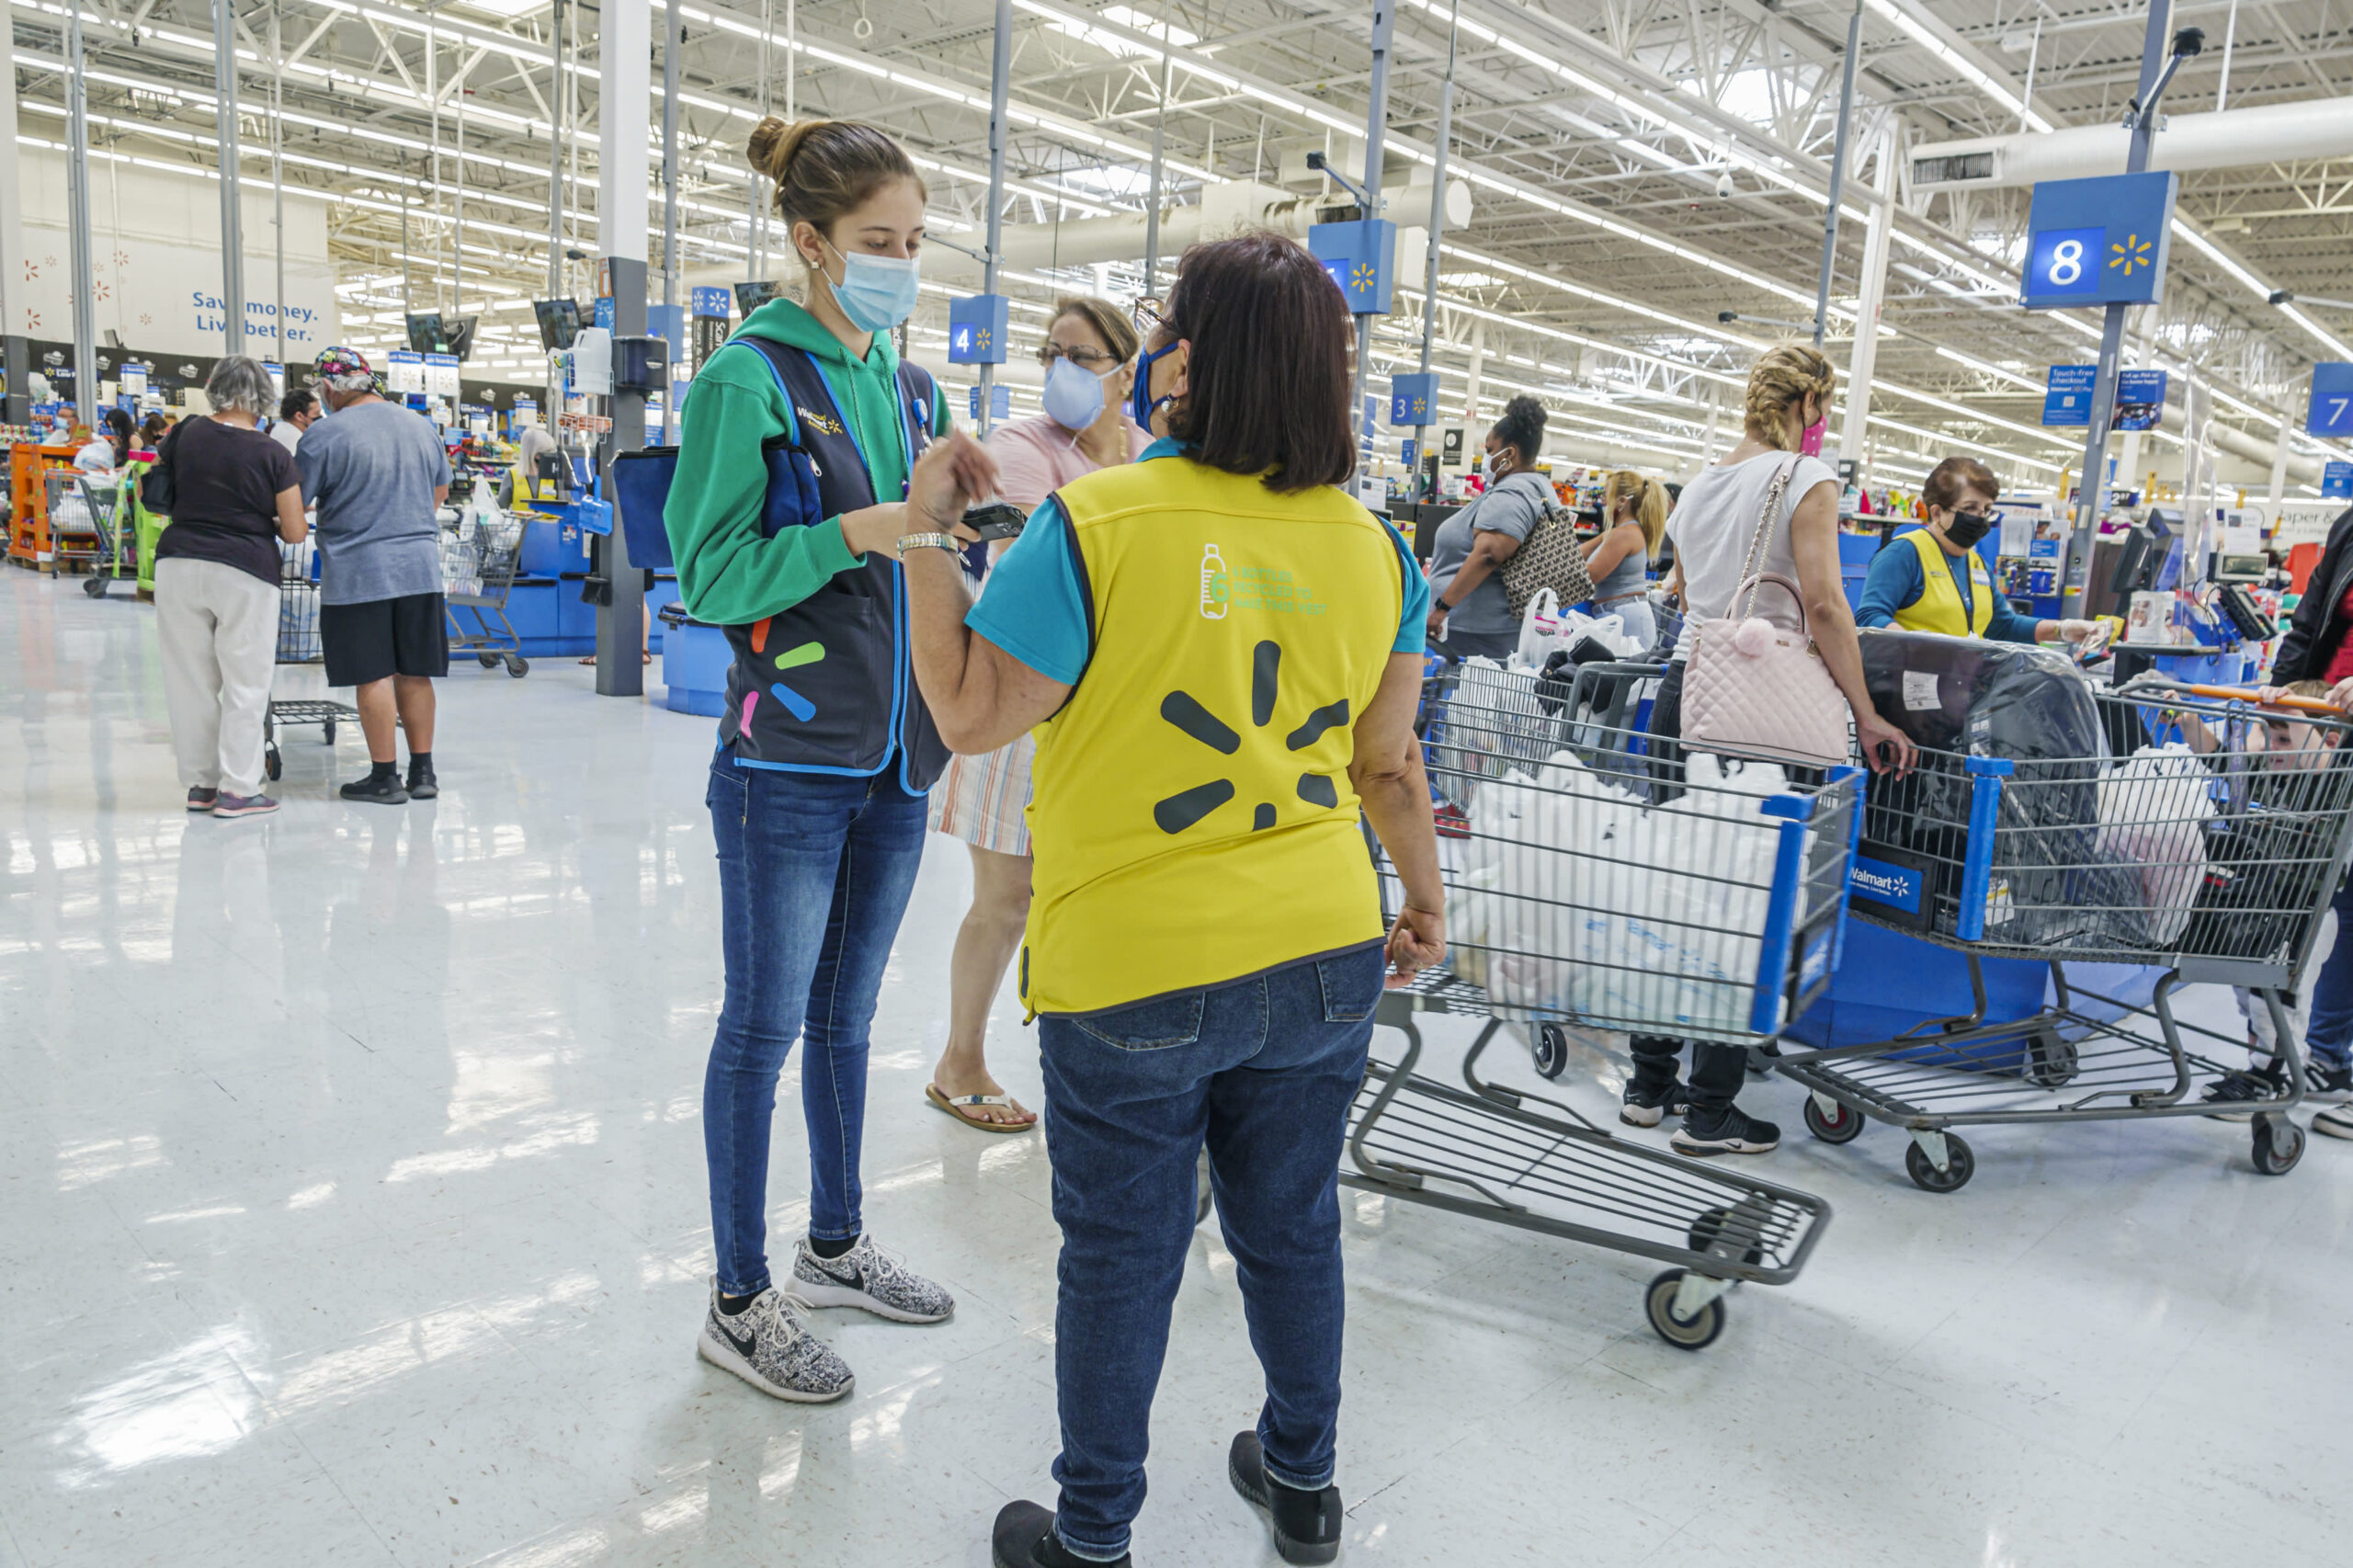 Walmart hikes hourly pay by $1 for over 550,000 employees